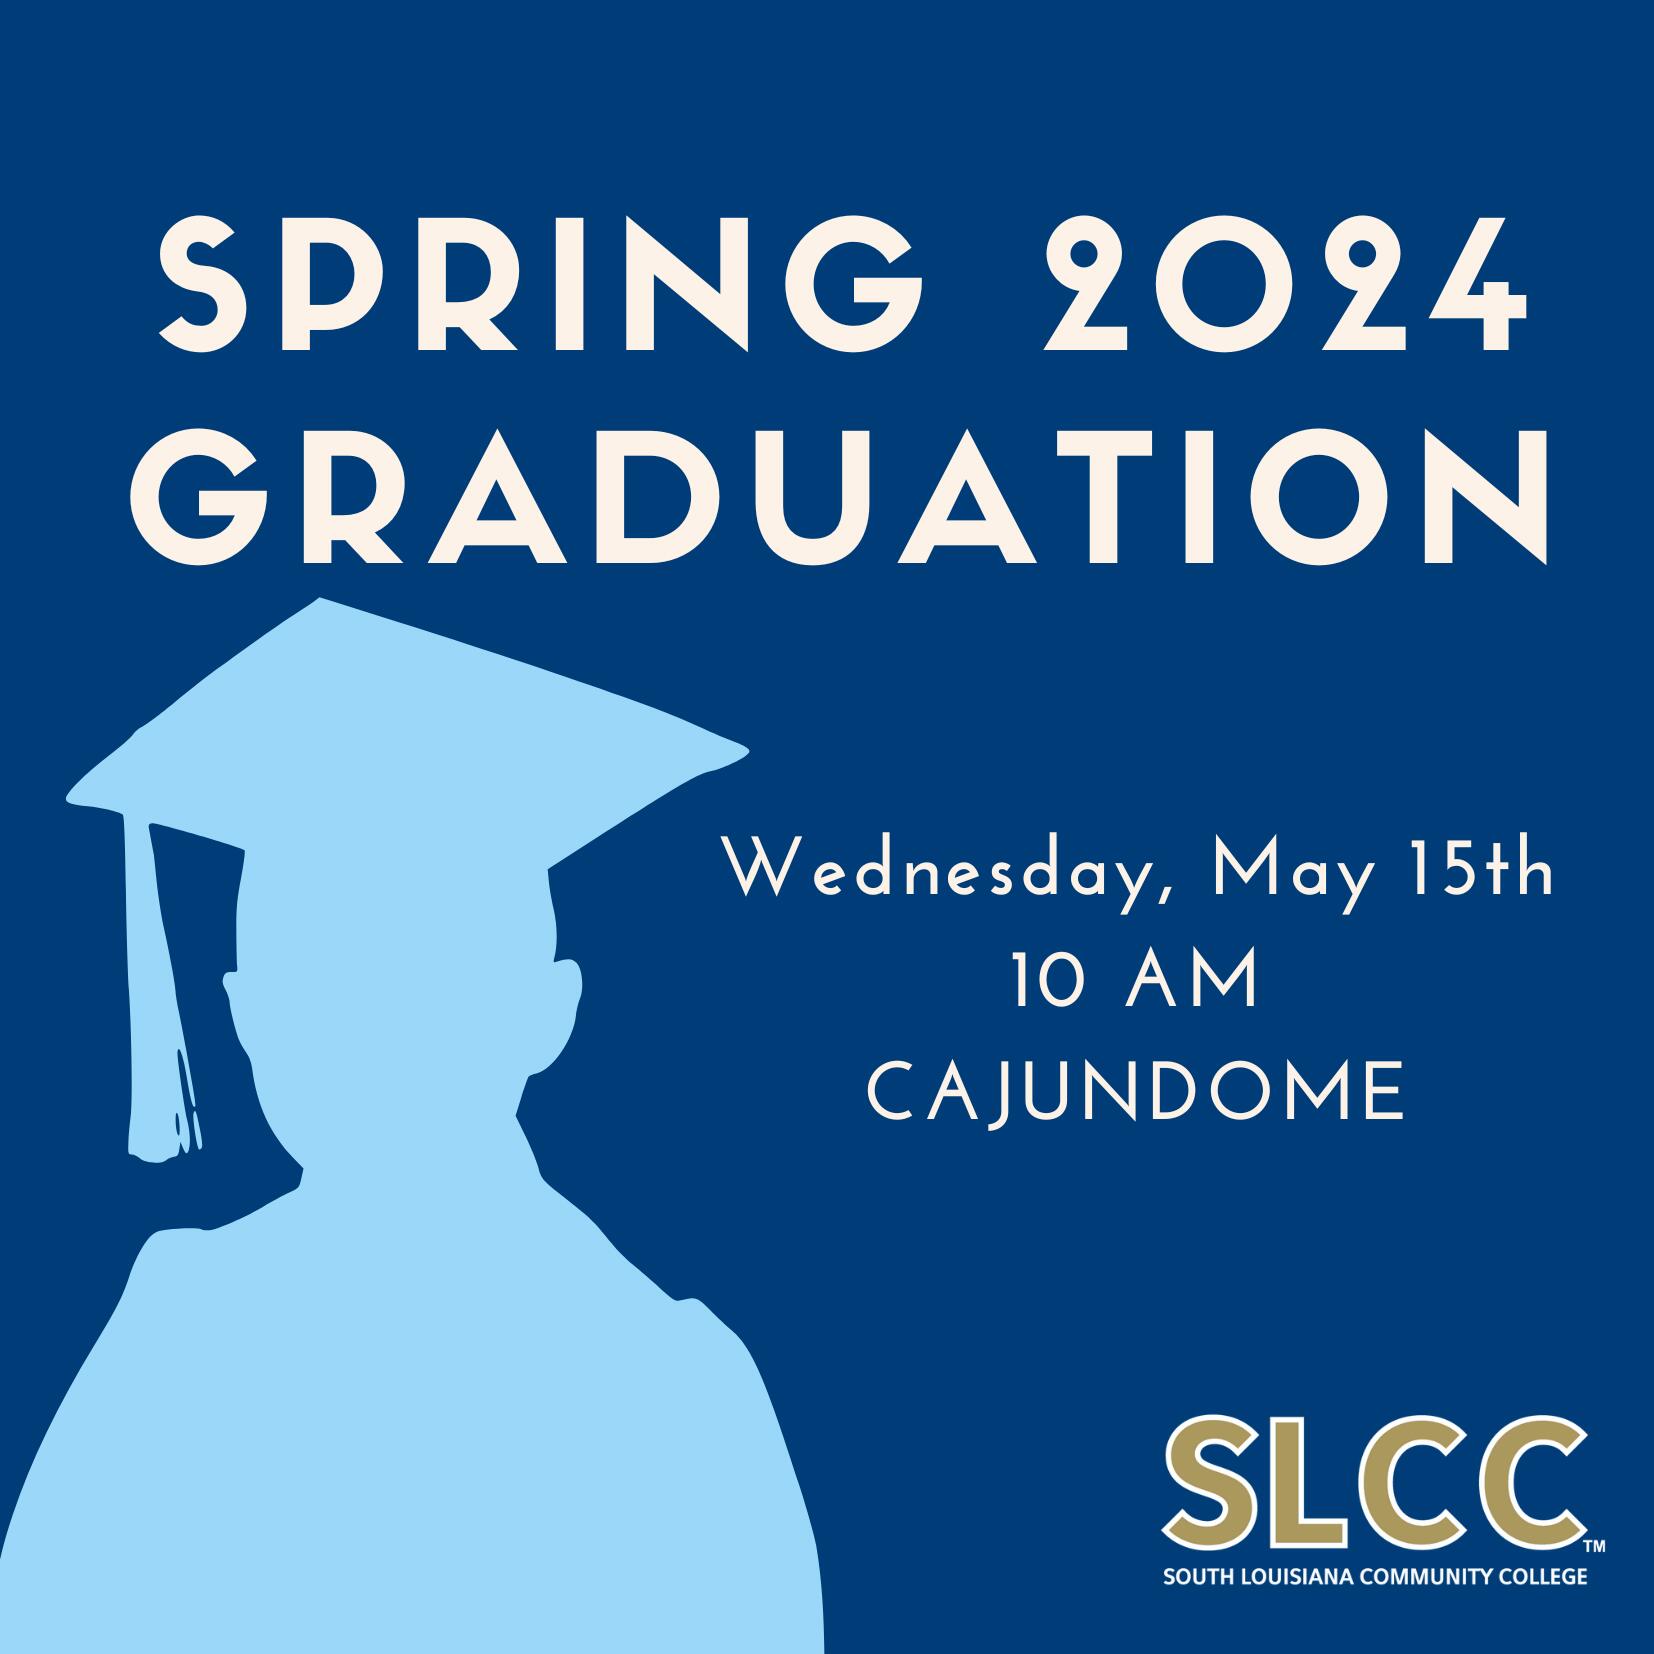 South Louisiana Community College Spring 2024 graduation save the date